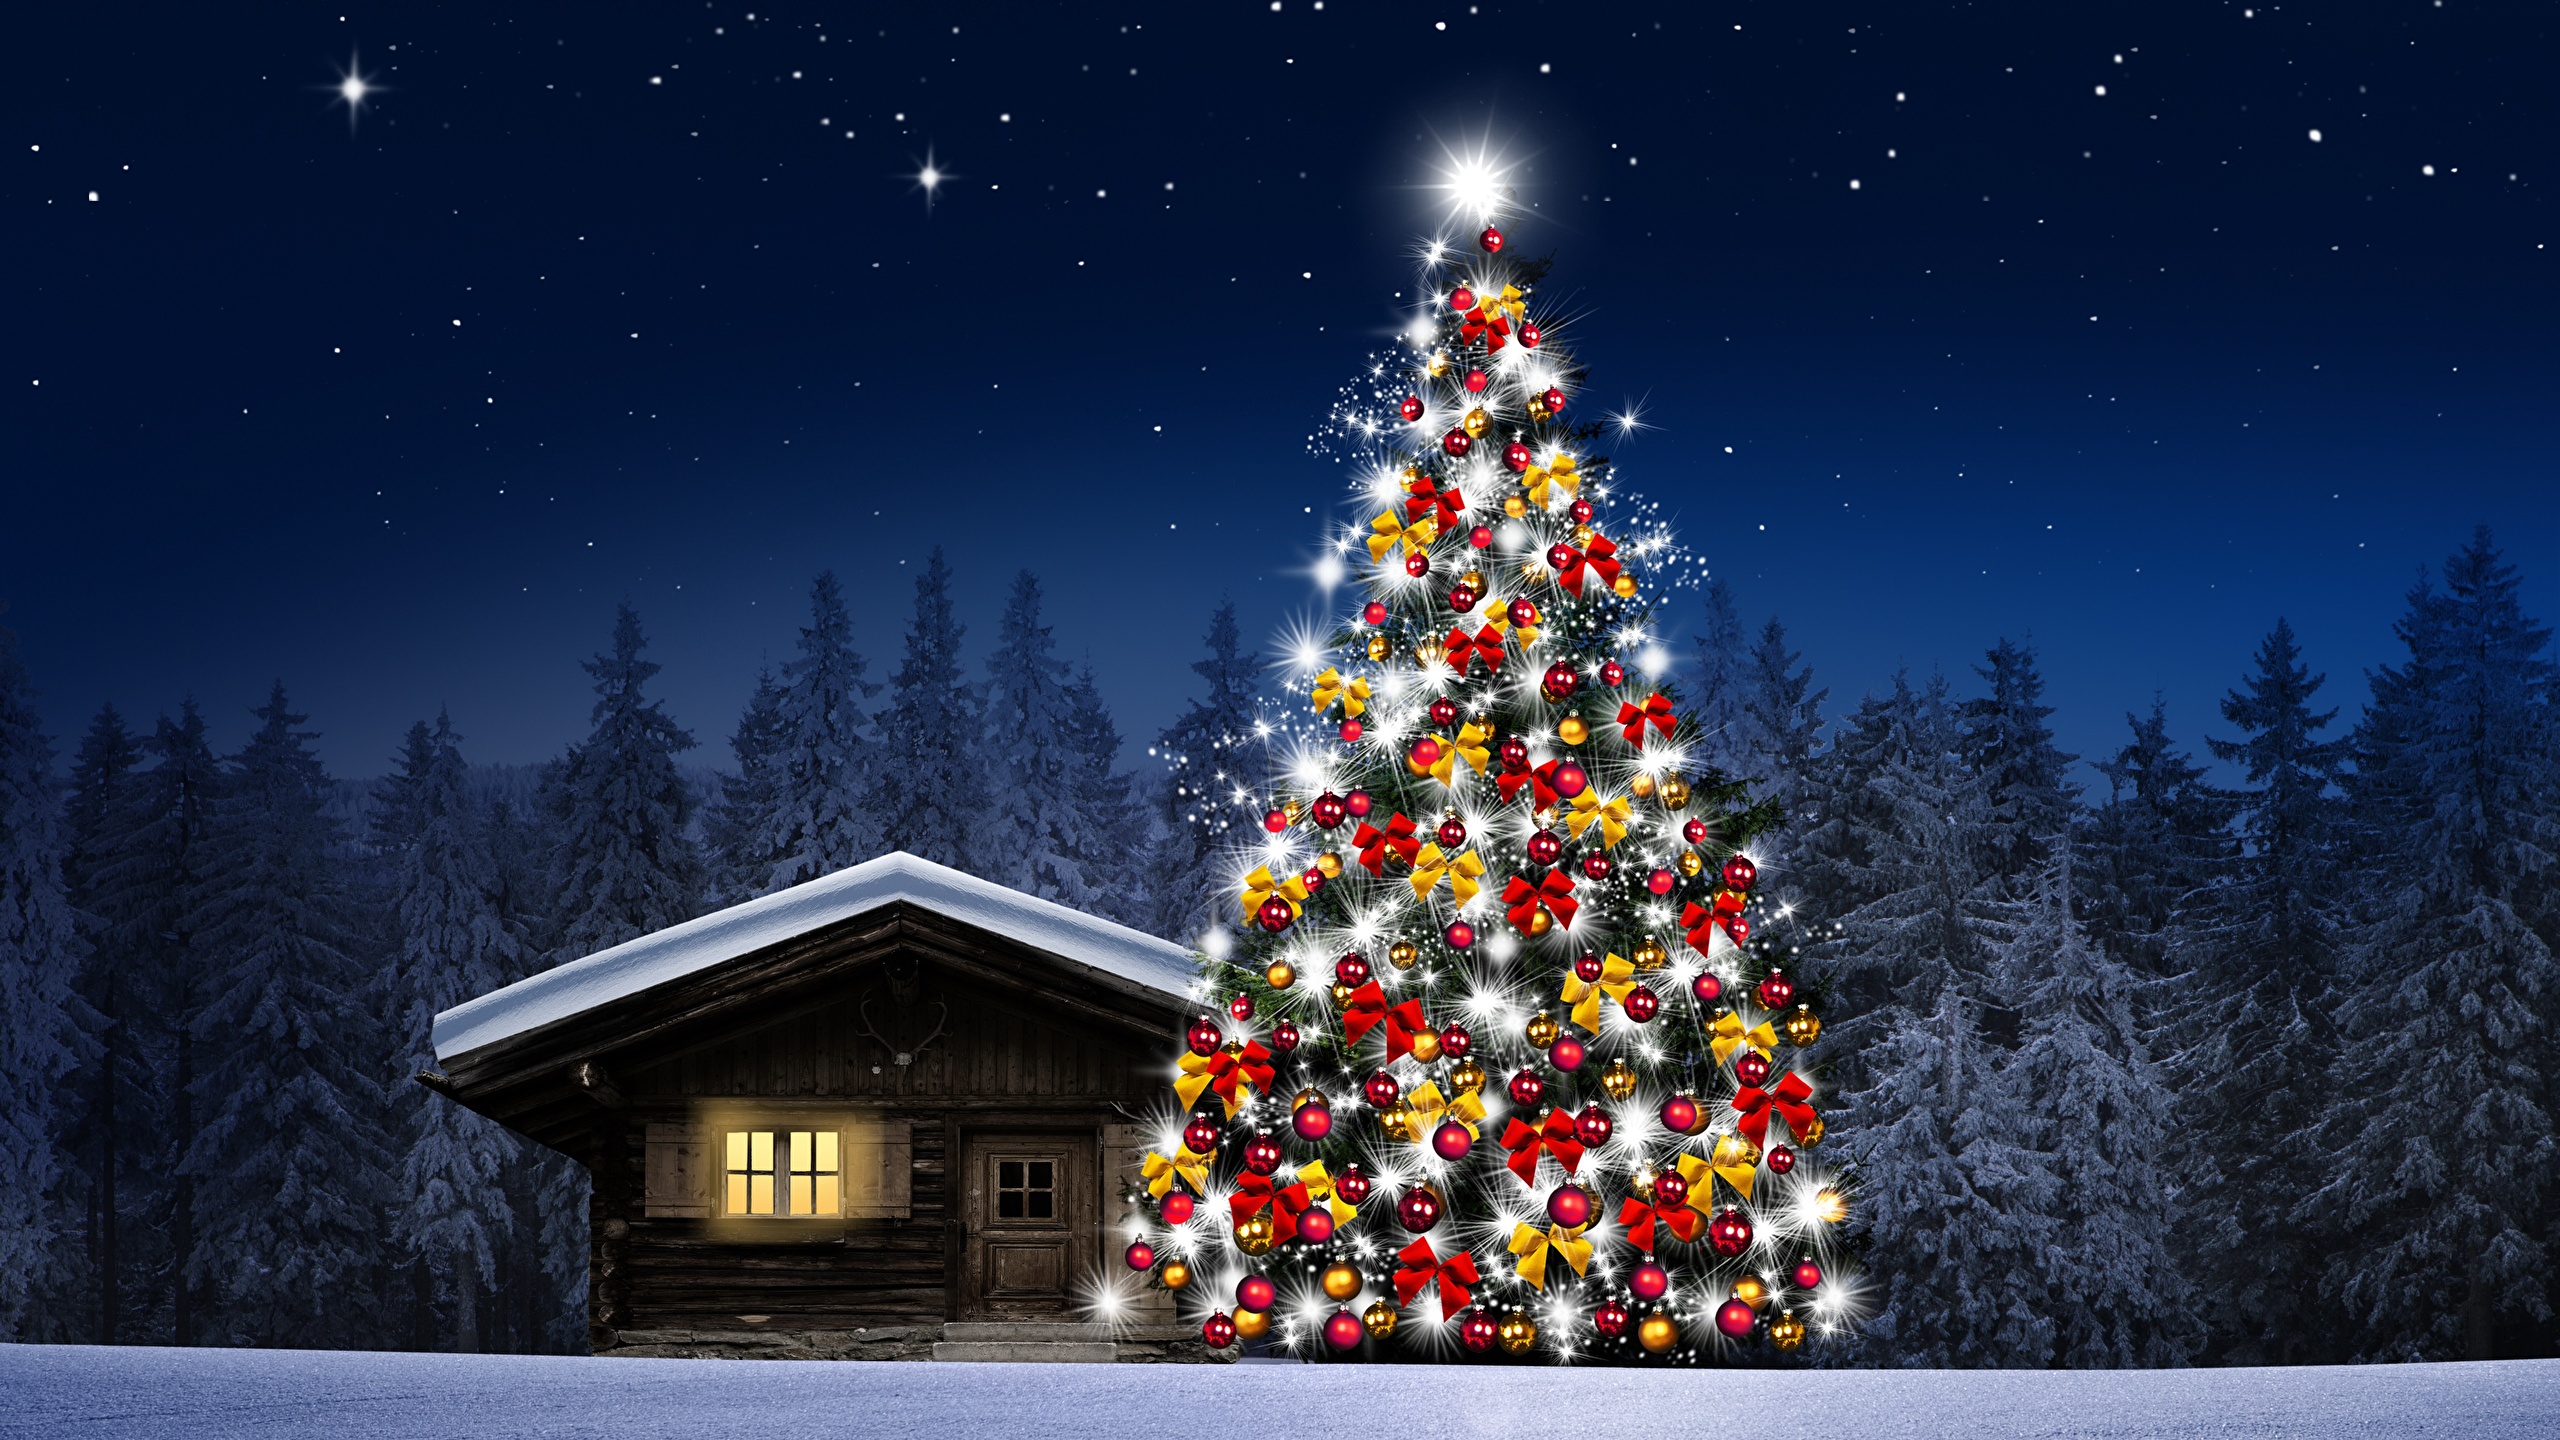 image Nature Christmas tree Snow Forests night time 2560x1440